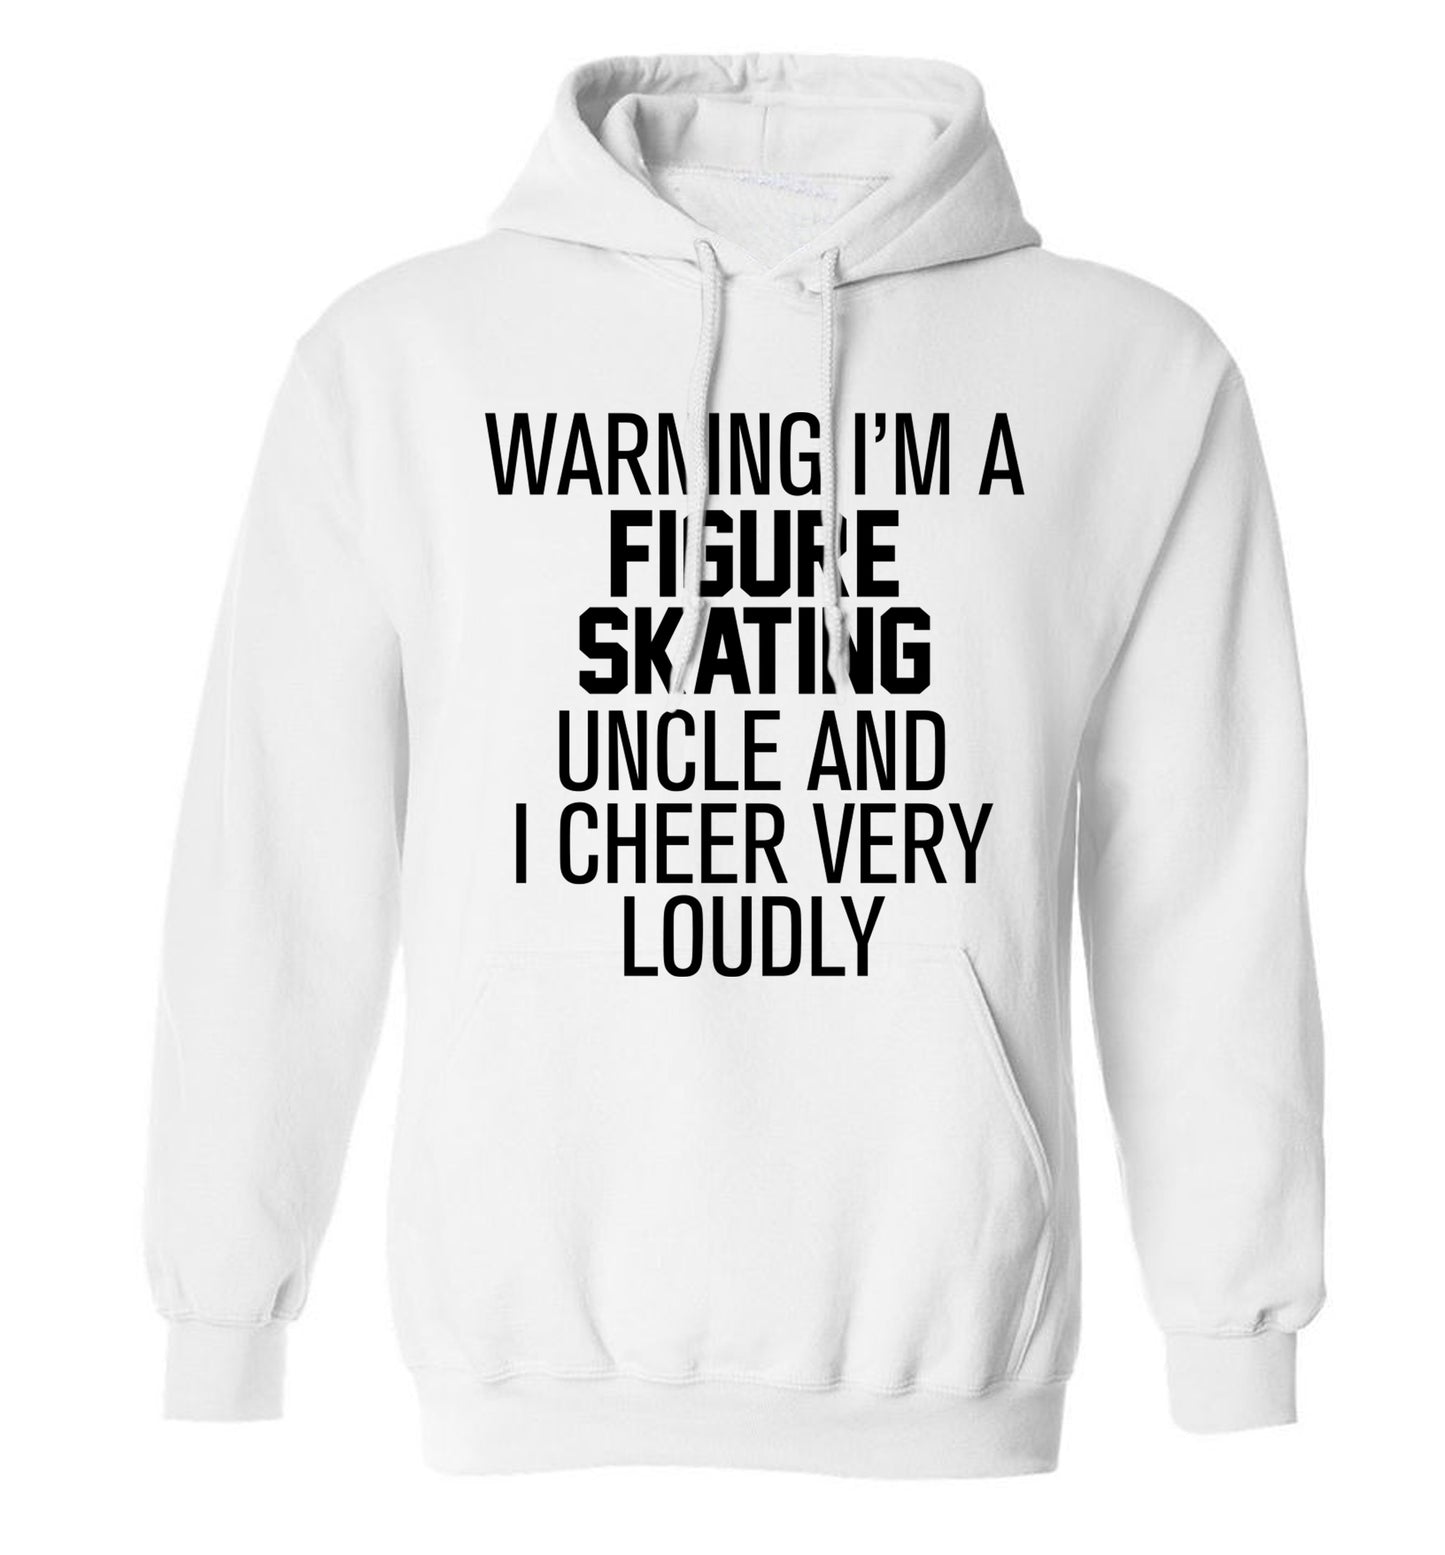 Warning I'm a figure skating uncle and I cheer very loudly adults unisexwhite hoodie 2XL